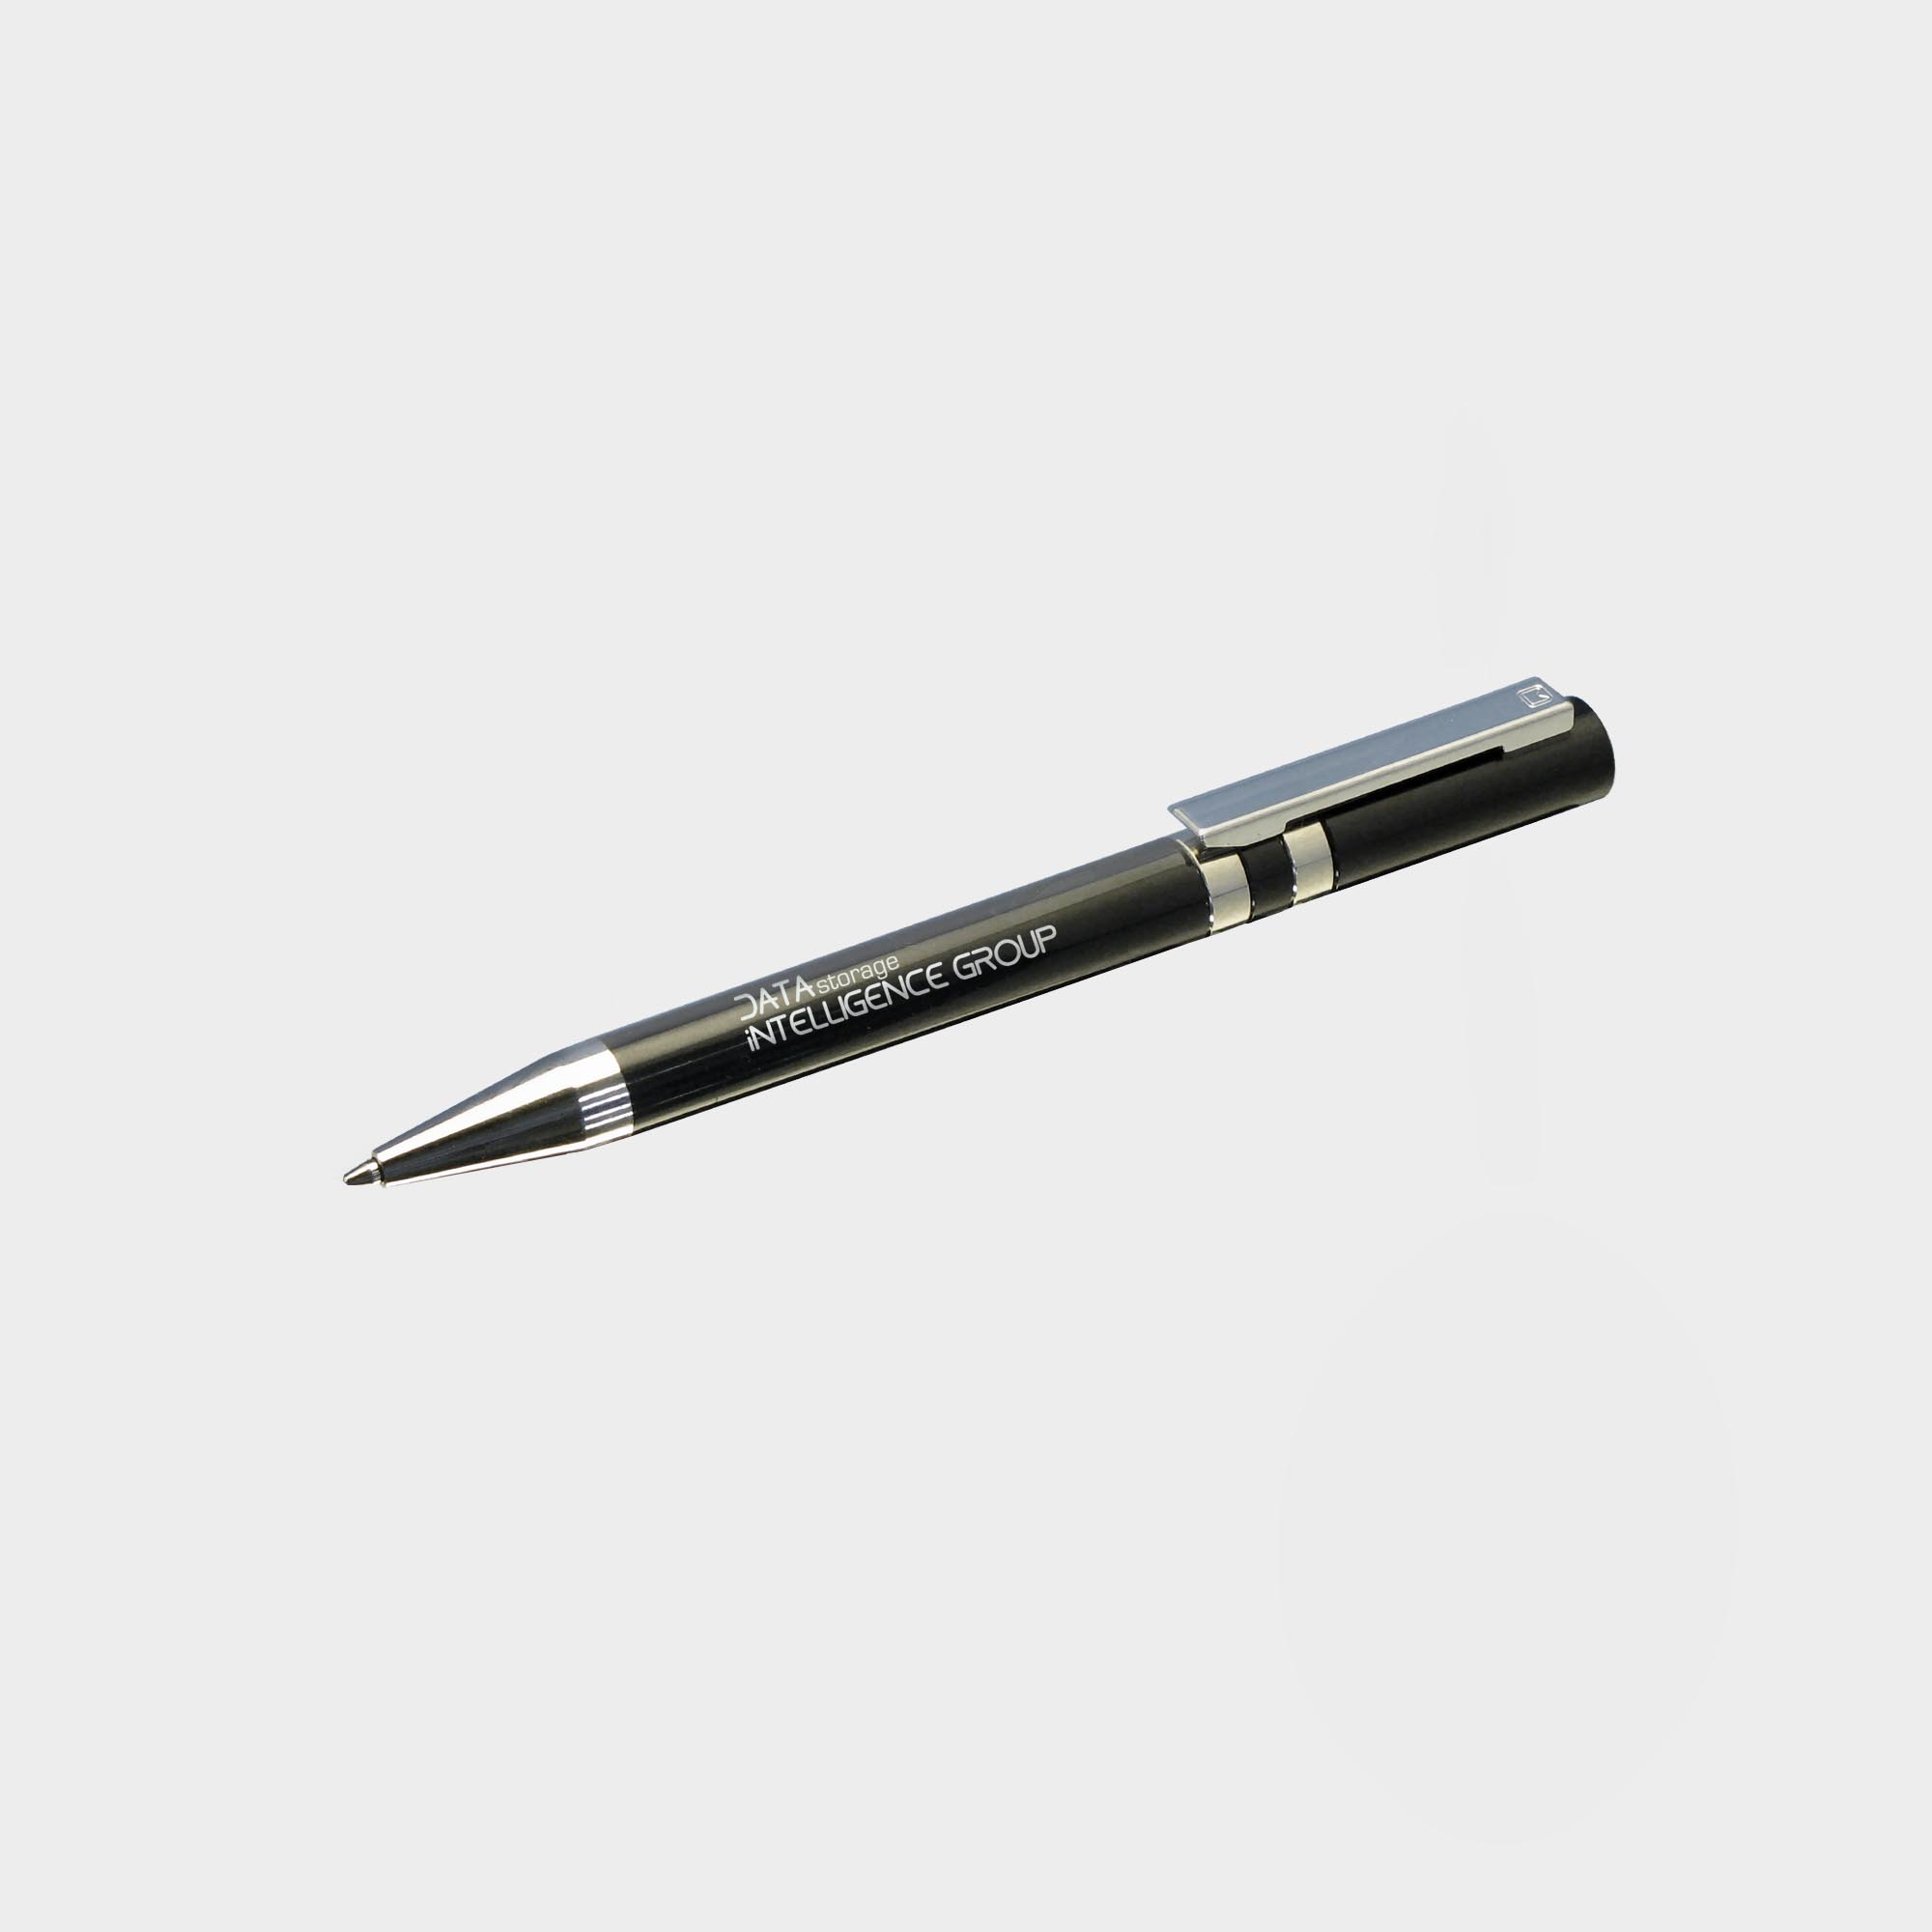 The Green & Good Ethic Pen made from recycled plastic. Stylish executive pen with chrome tip and various colour upon request. Black ink as standard. Black / Silver